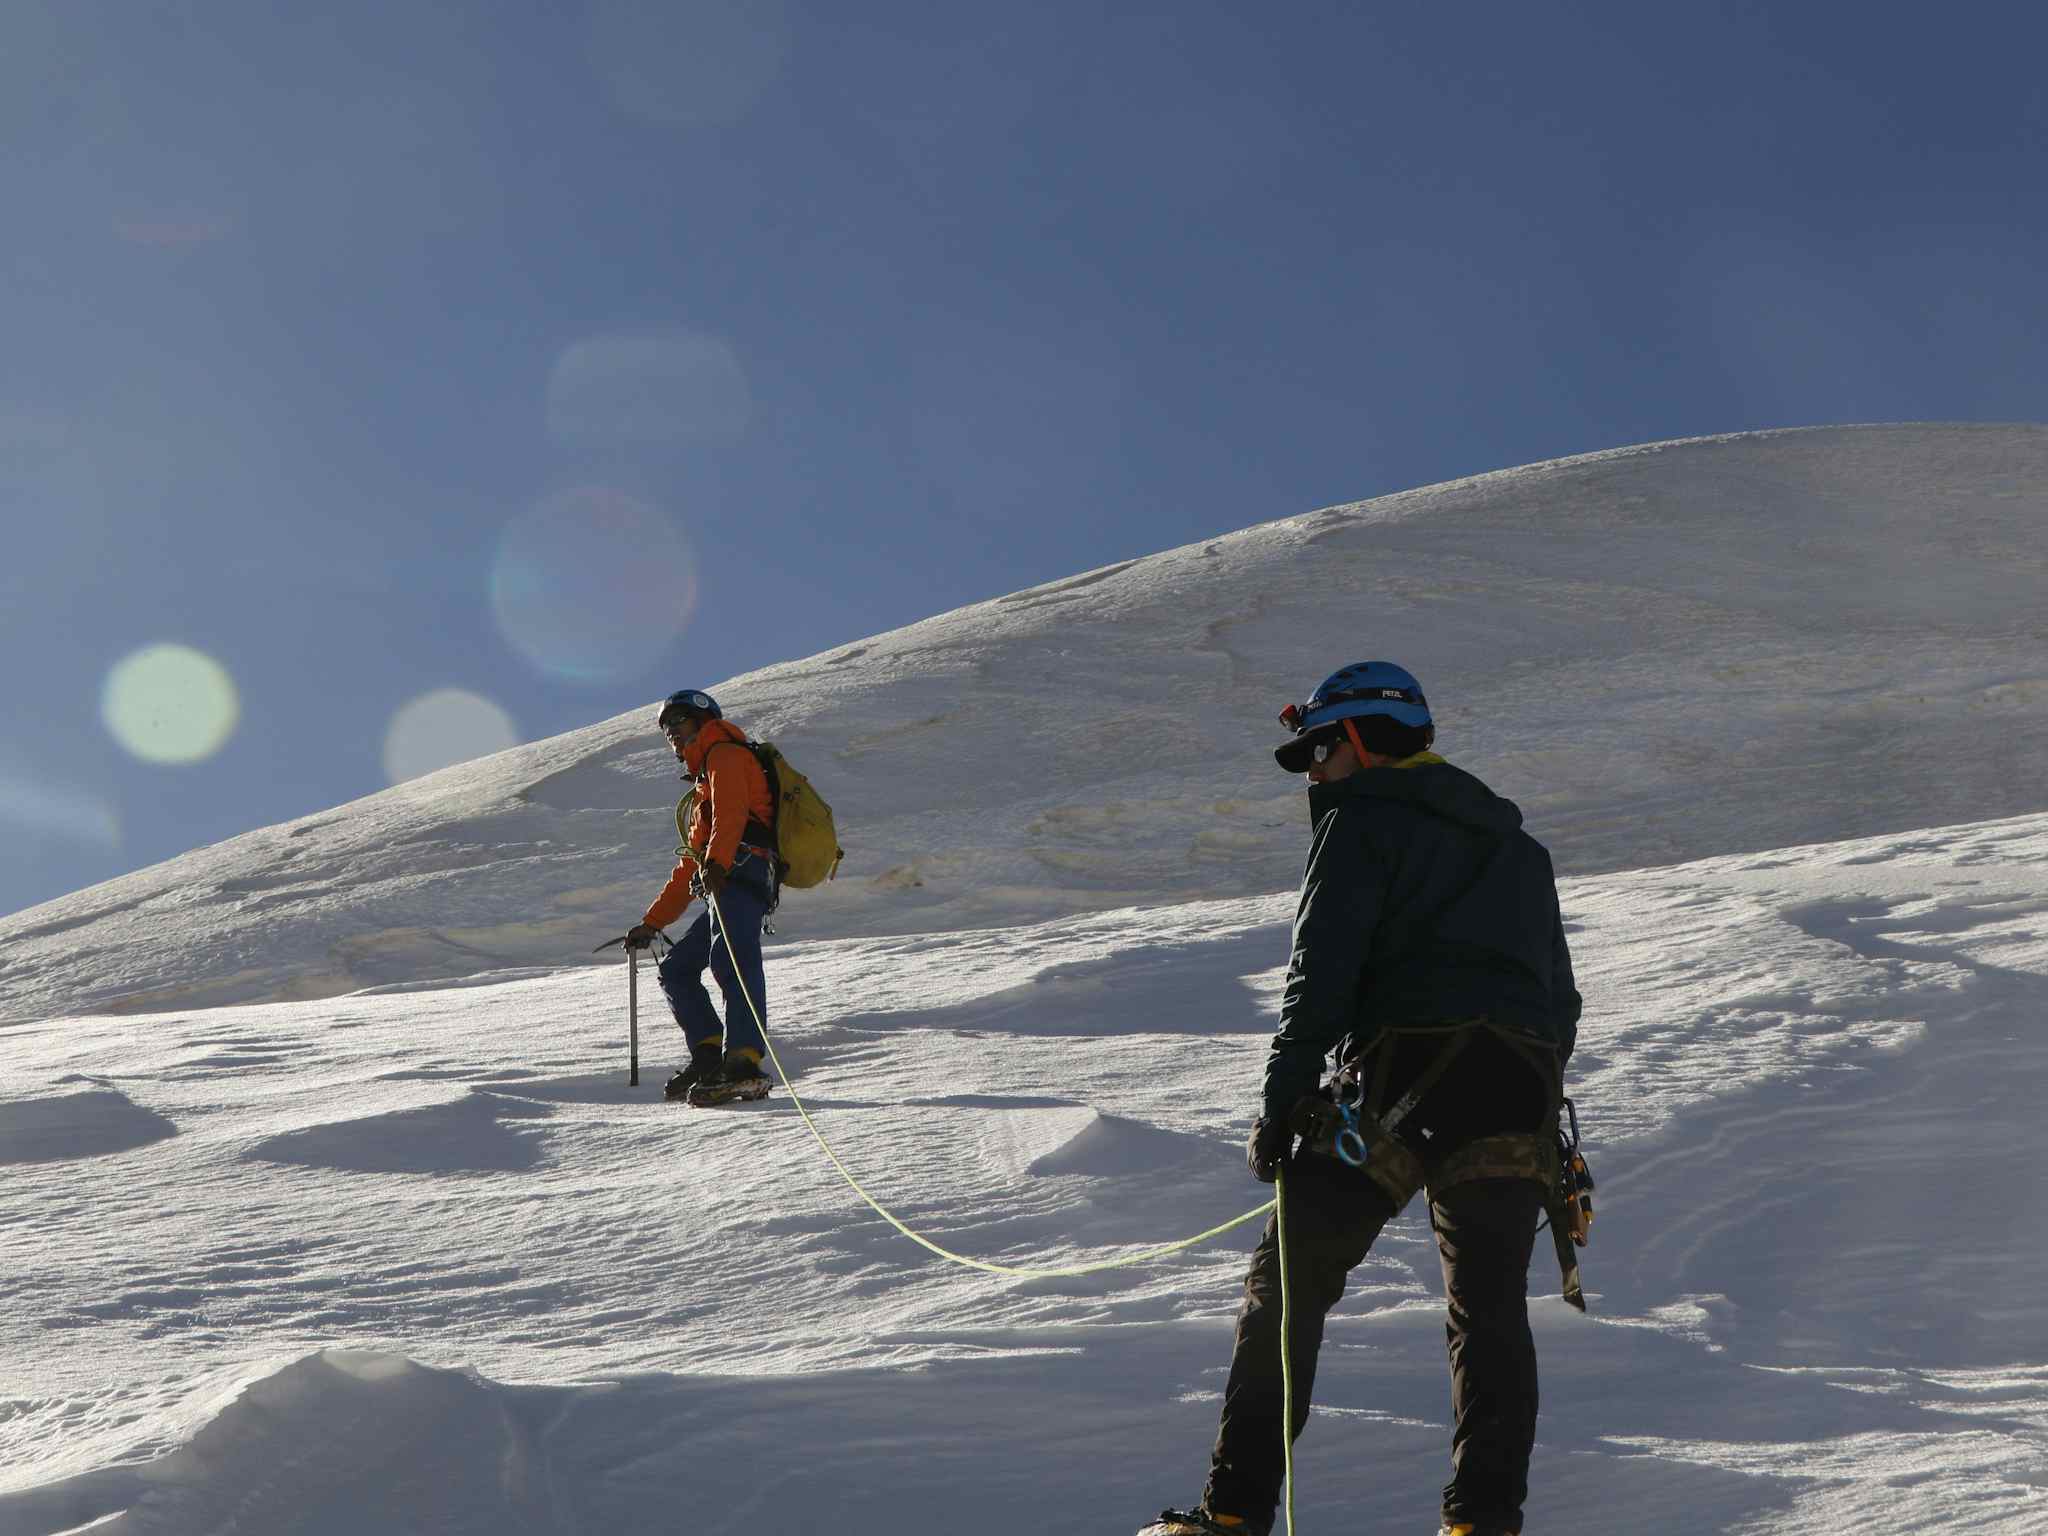 Two hikers testing out mountaineering gear in Nepal.